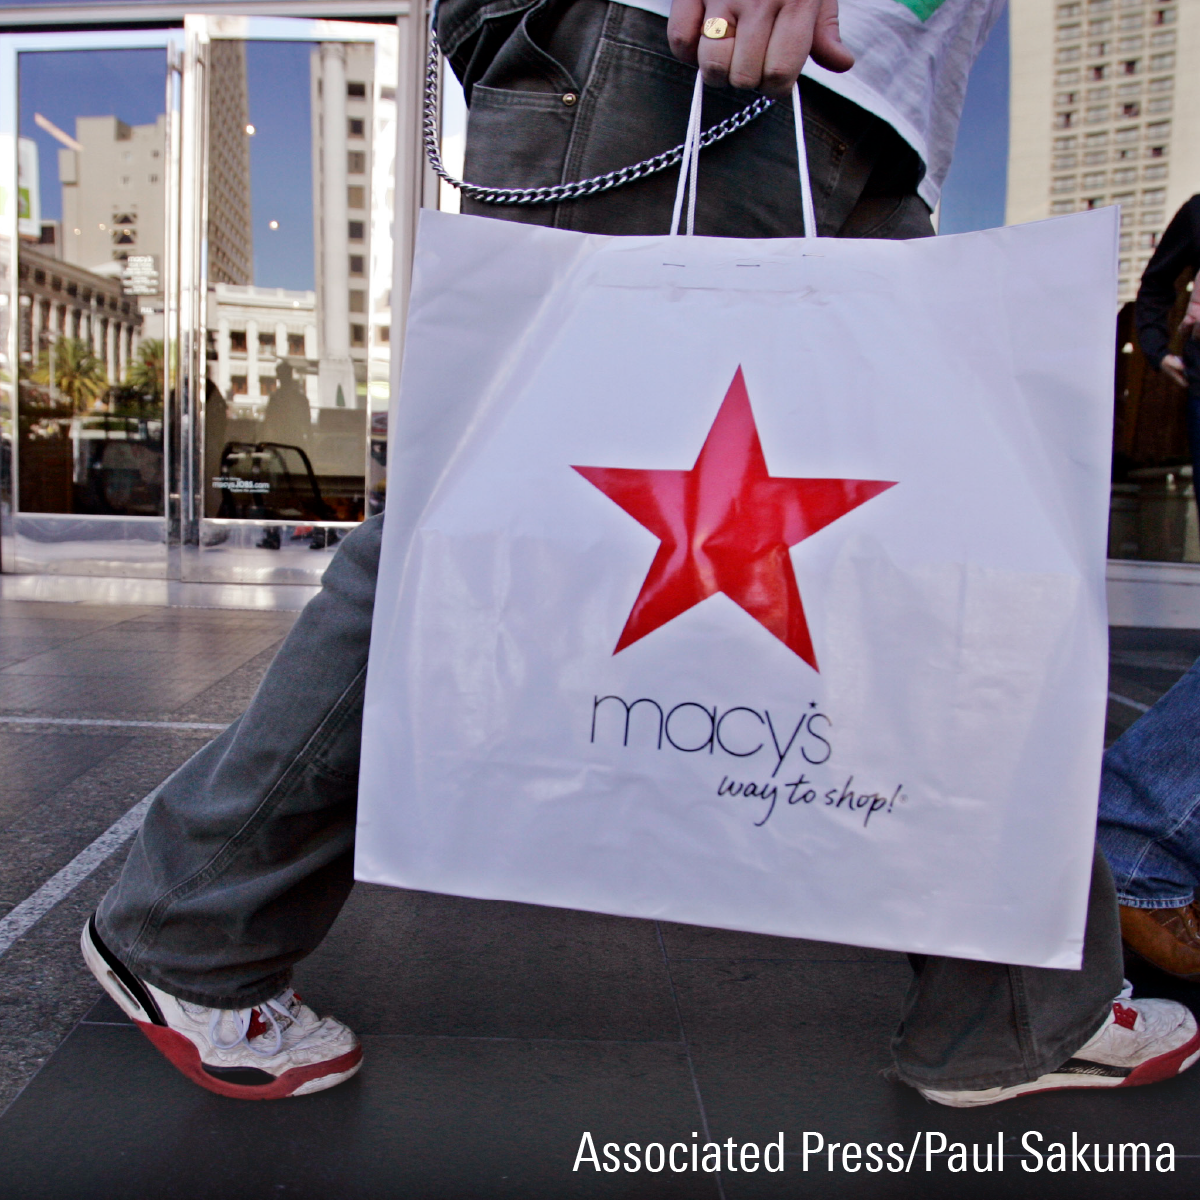 Macy’s: Raised Offer Should Be Considered